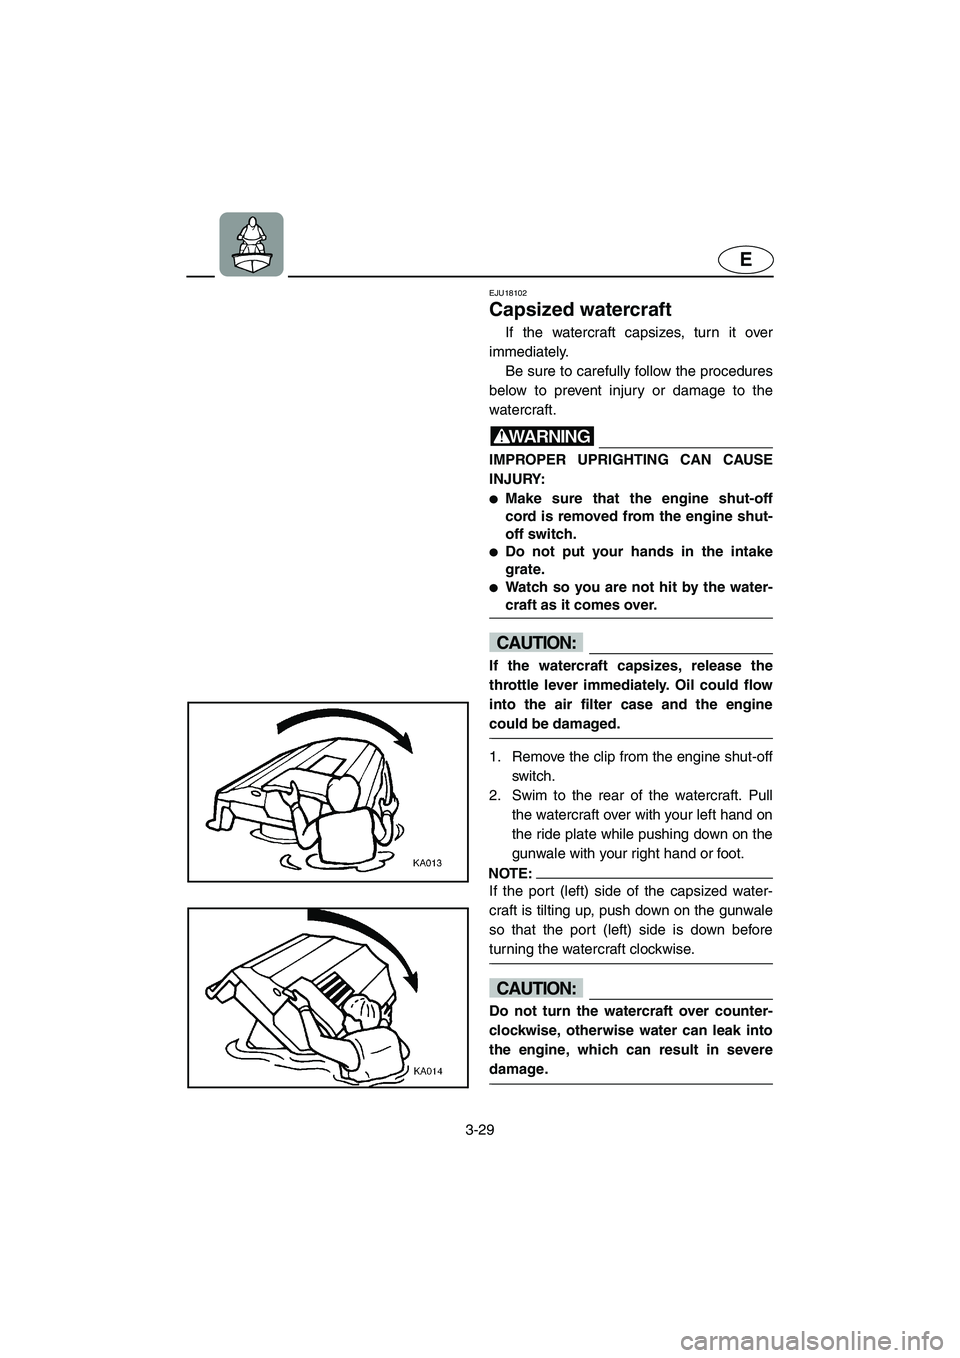 YAMAHA FX HO CRUISER 2006  Owners Manual 3-29
E
EJU18102 
Capsized watercraft 
If the watercraft capsizes, turn it over
immediately. 
Be sure to carefully follow the procedures
below to prevent injury or damage to the
watercraft.
WARNING@ IM